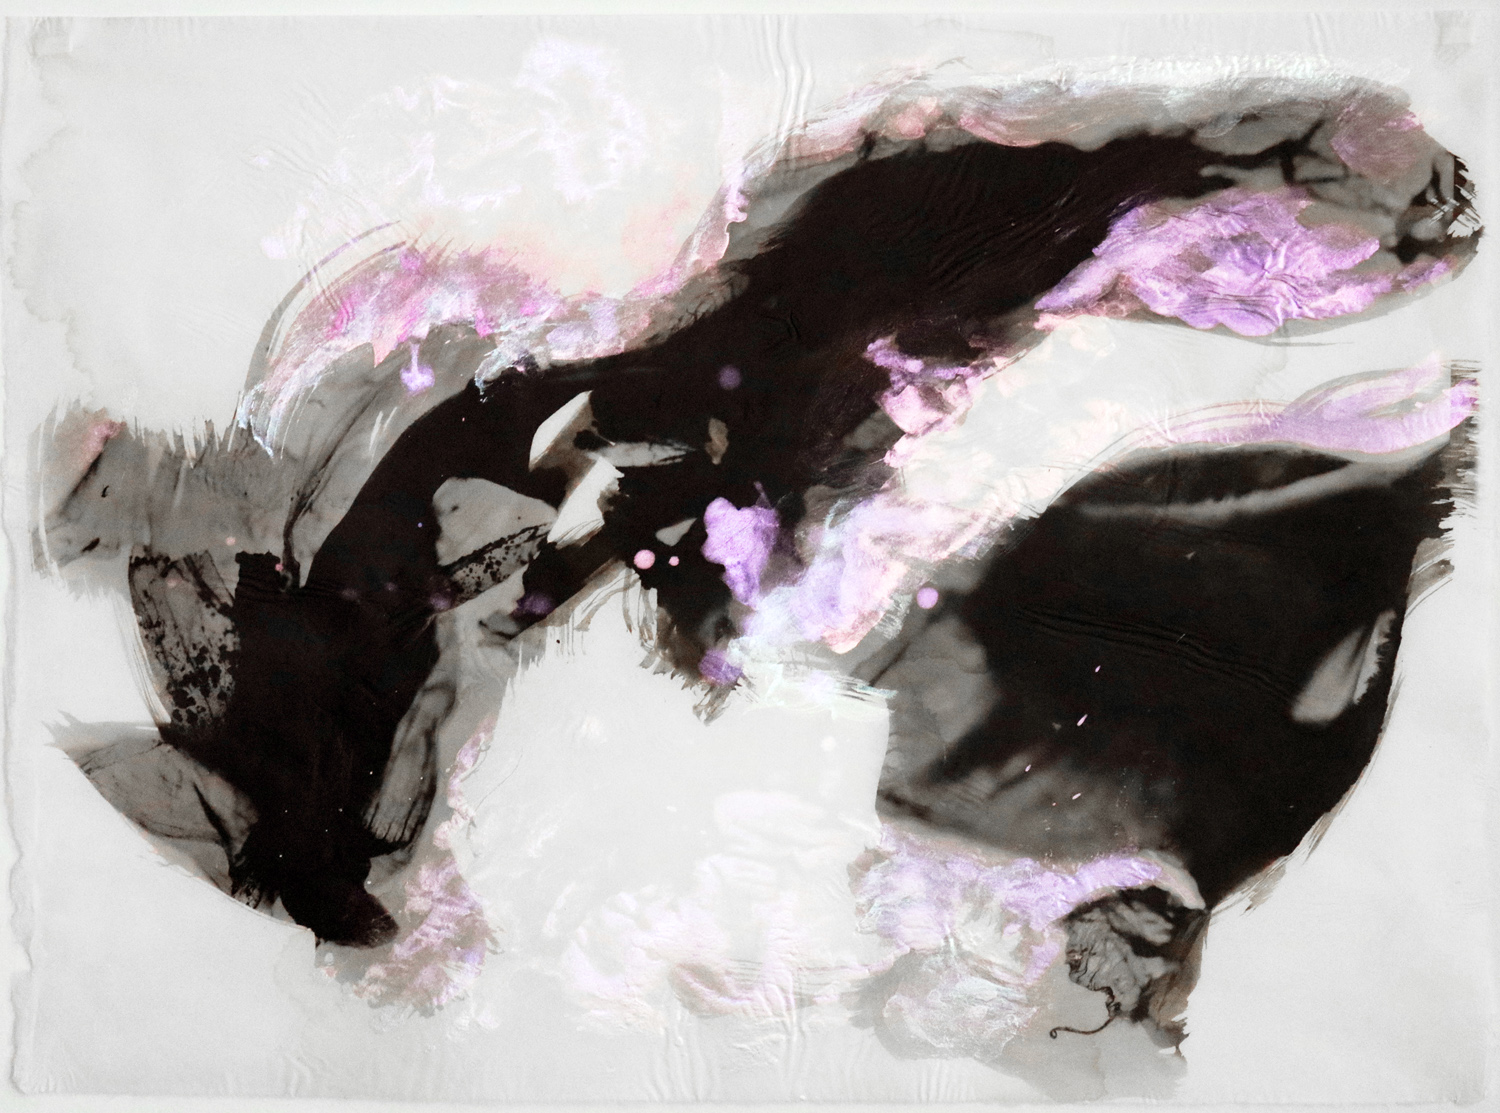 Dreaming describes the flow in this artwork of Iris flowers done with palladium and pearlescent watercolor.